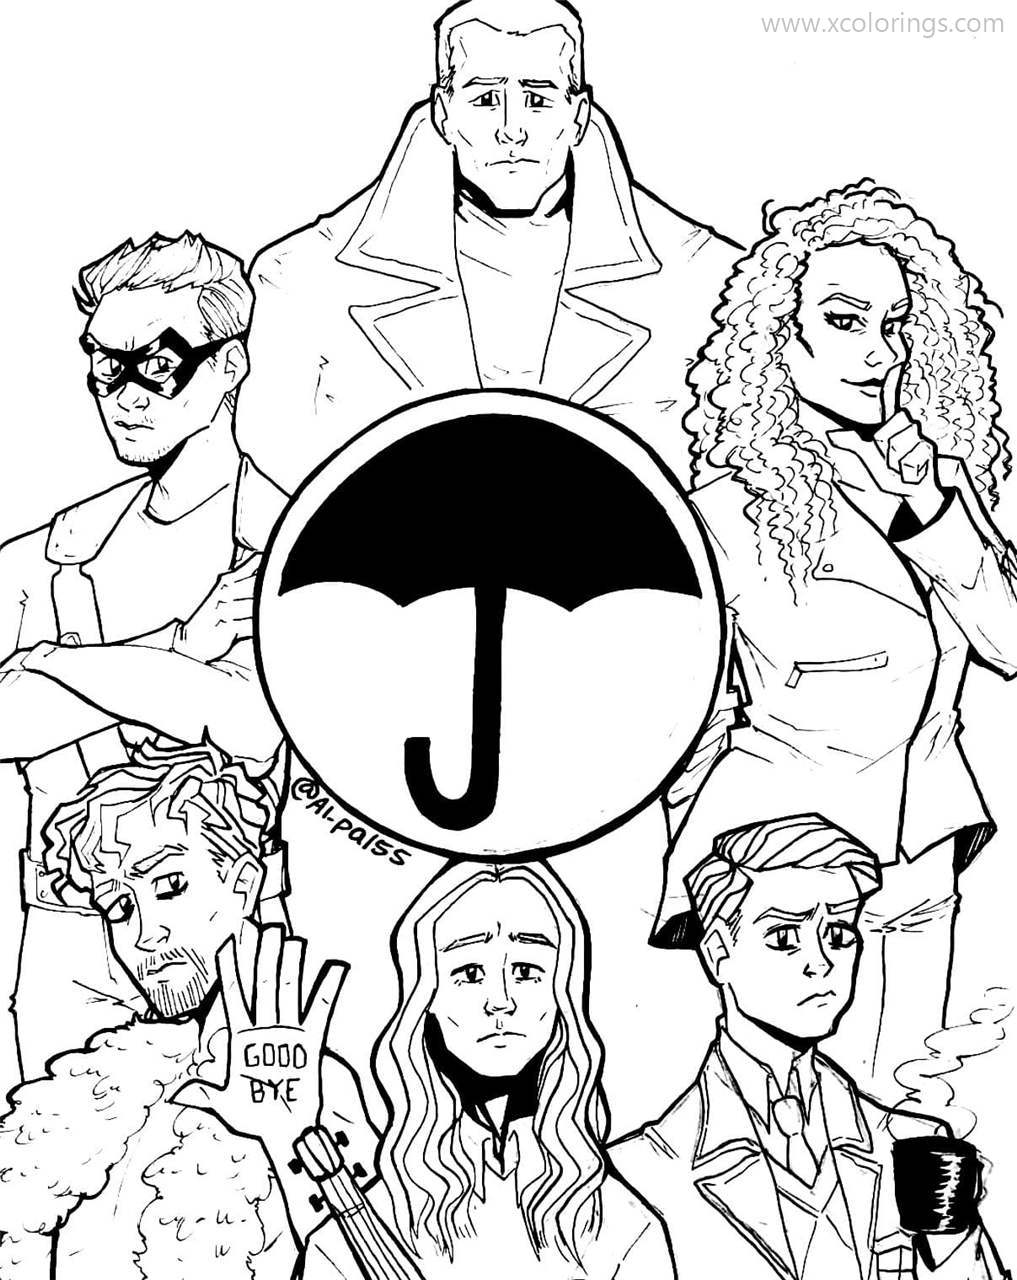 Free Umbrella Academy Coloring Pages Heroes with Abilities printable